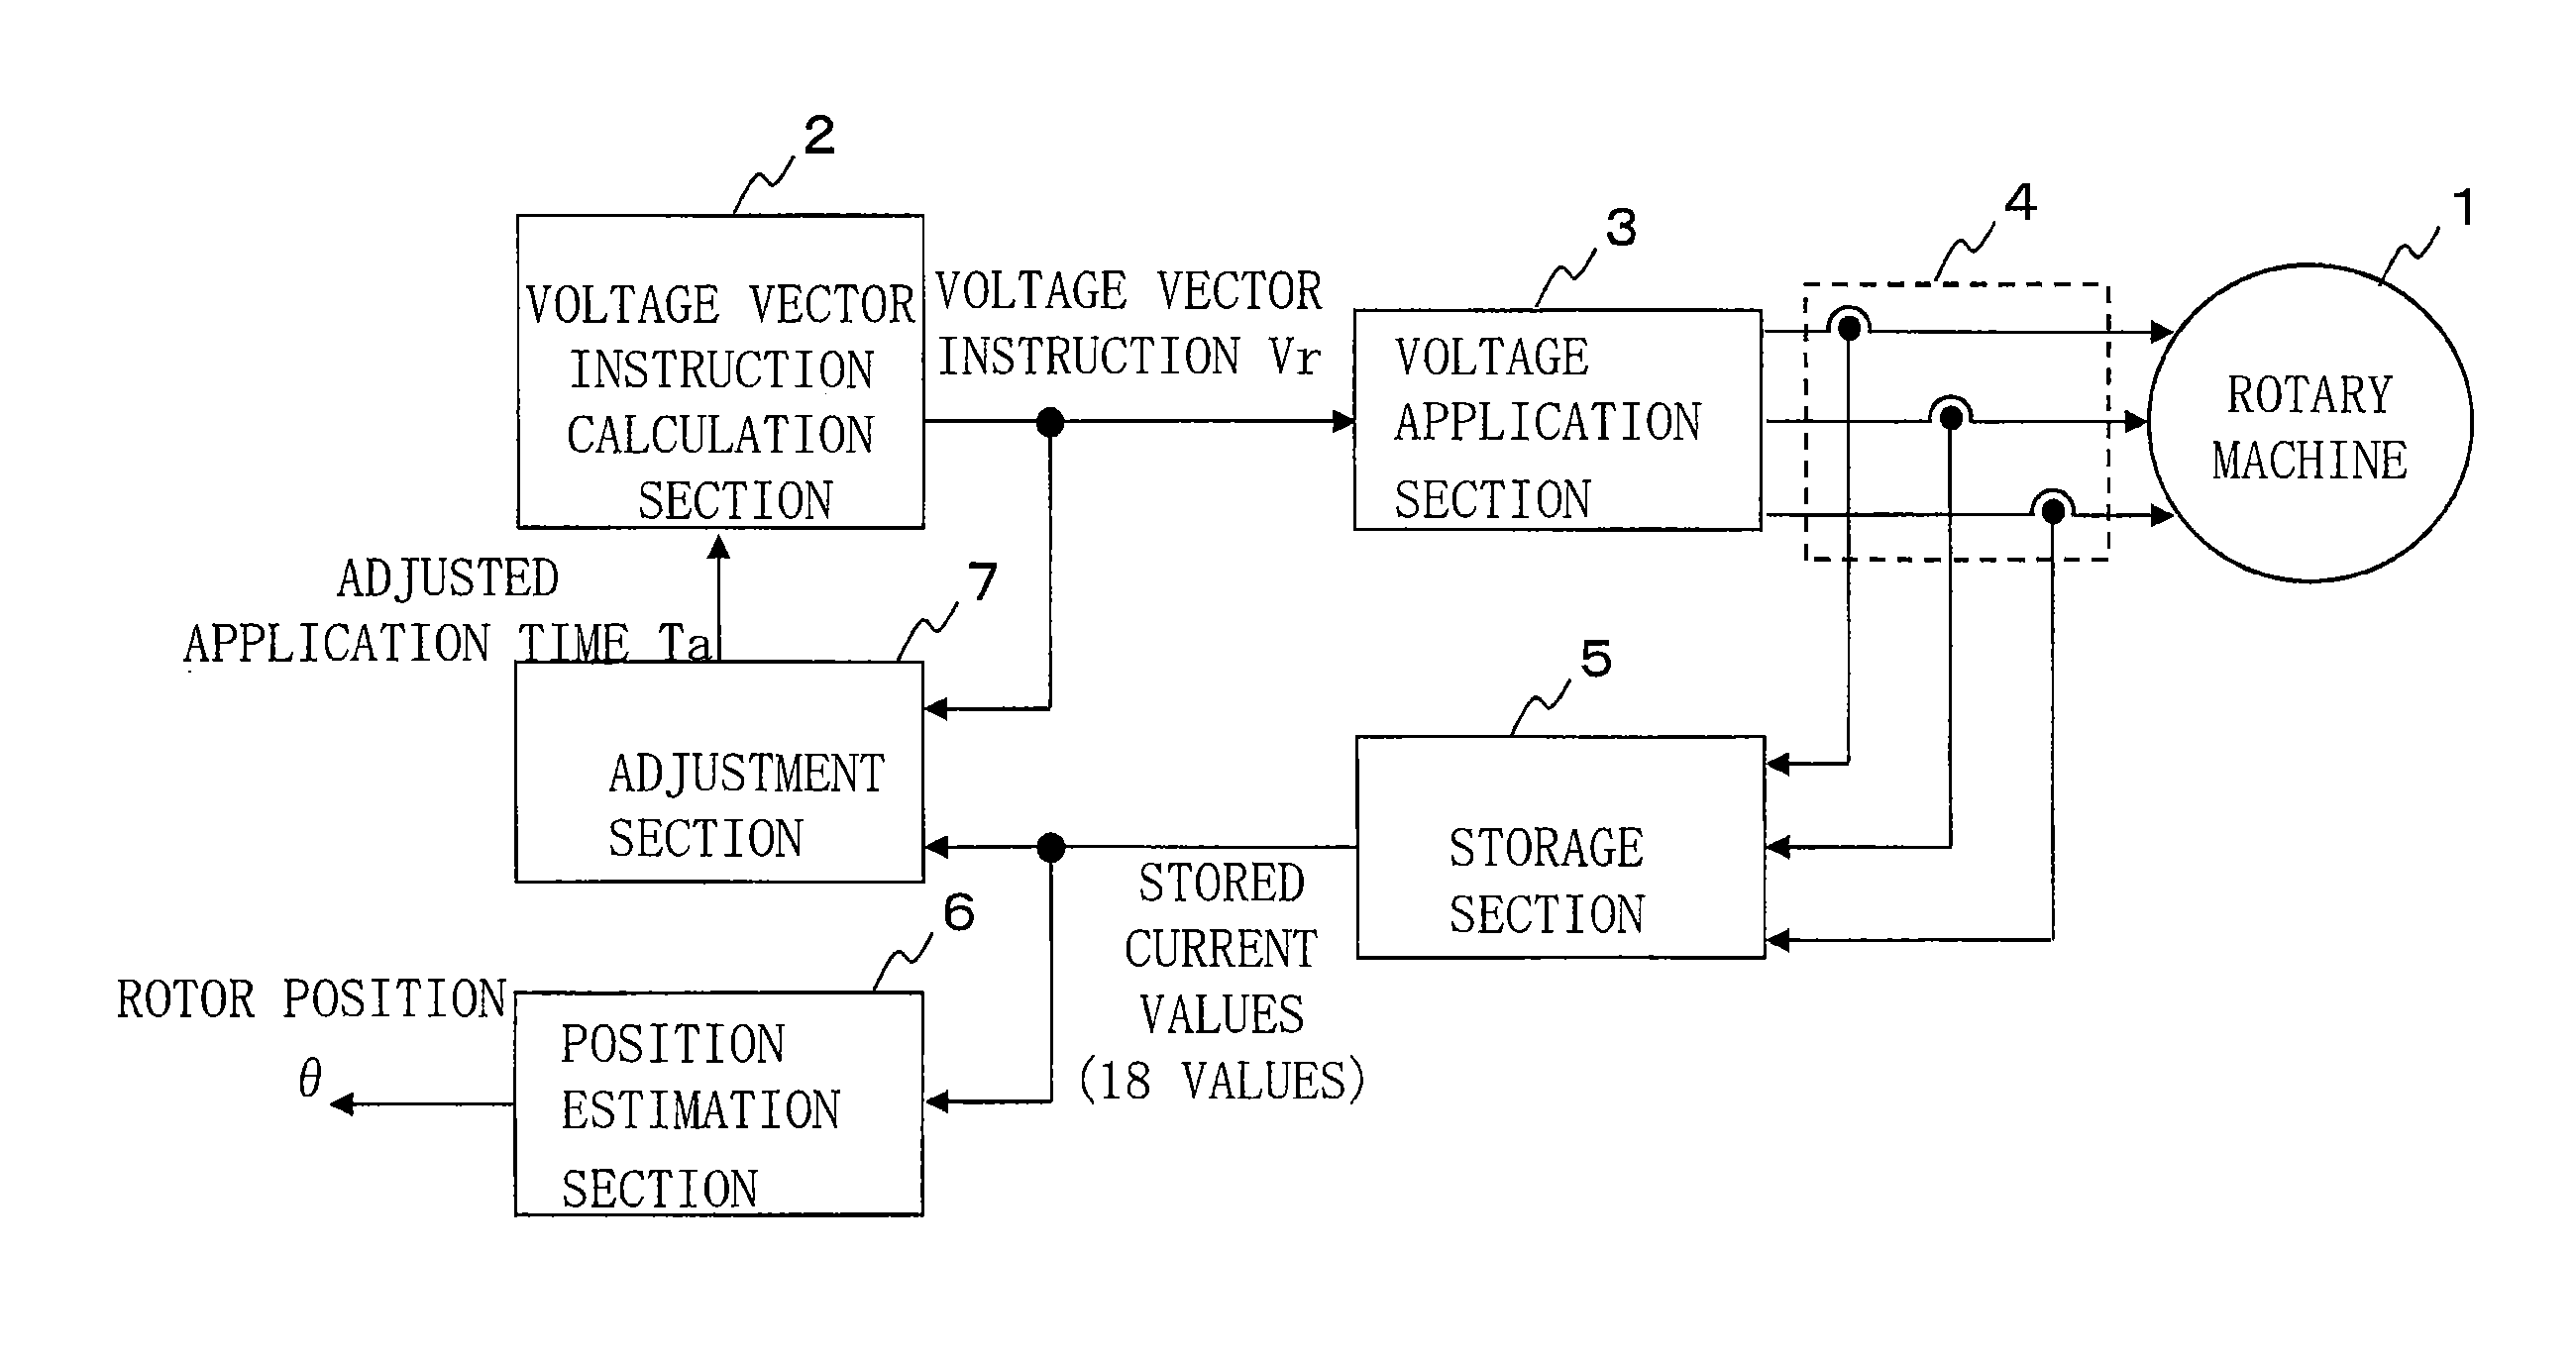 Control device for rotary machine